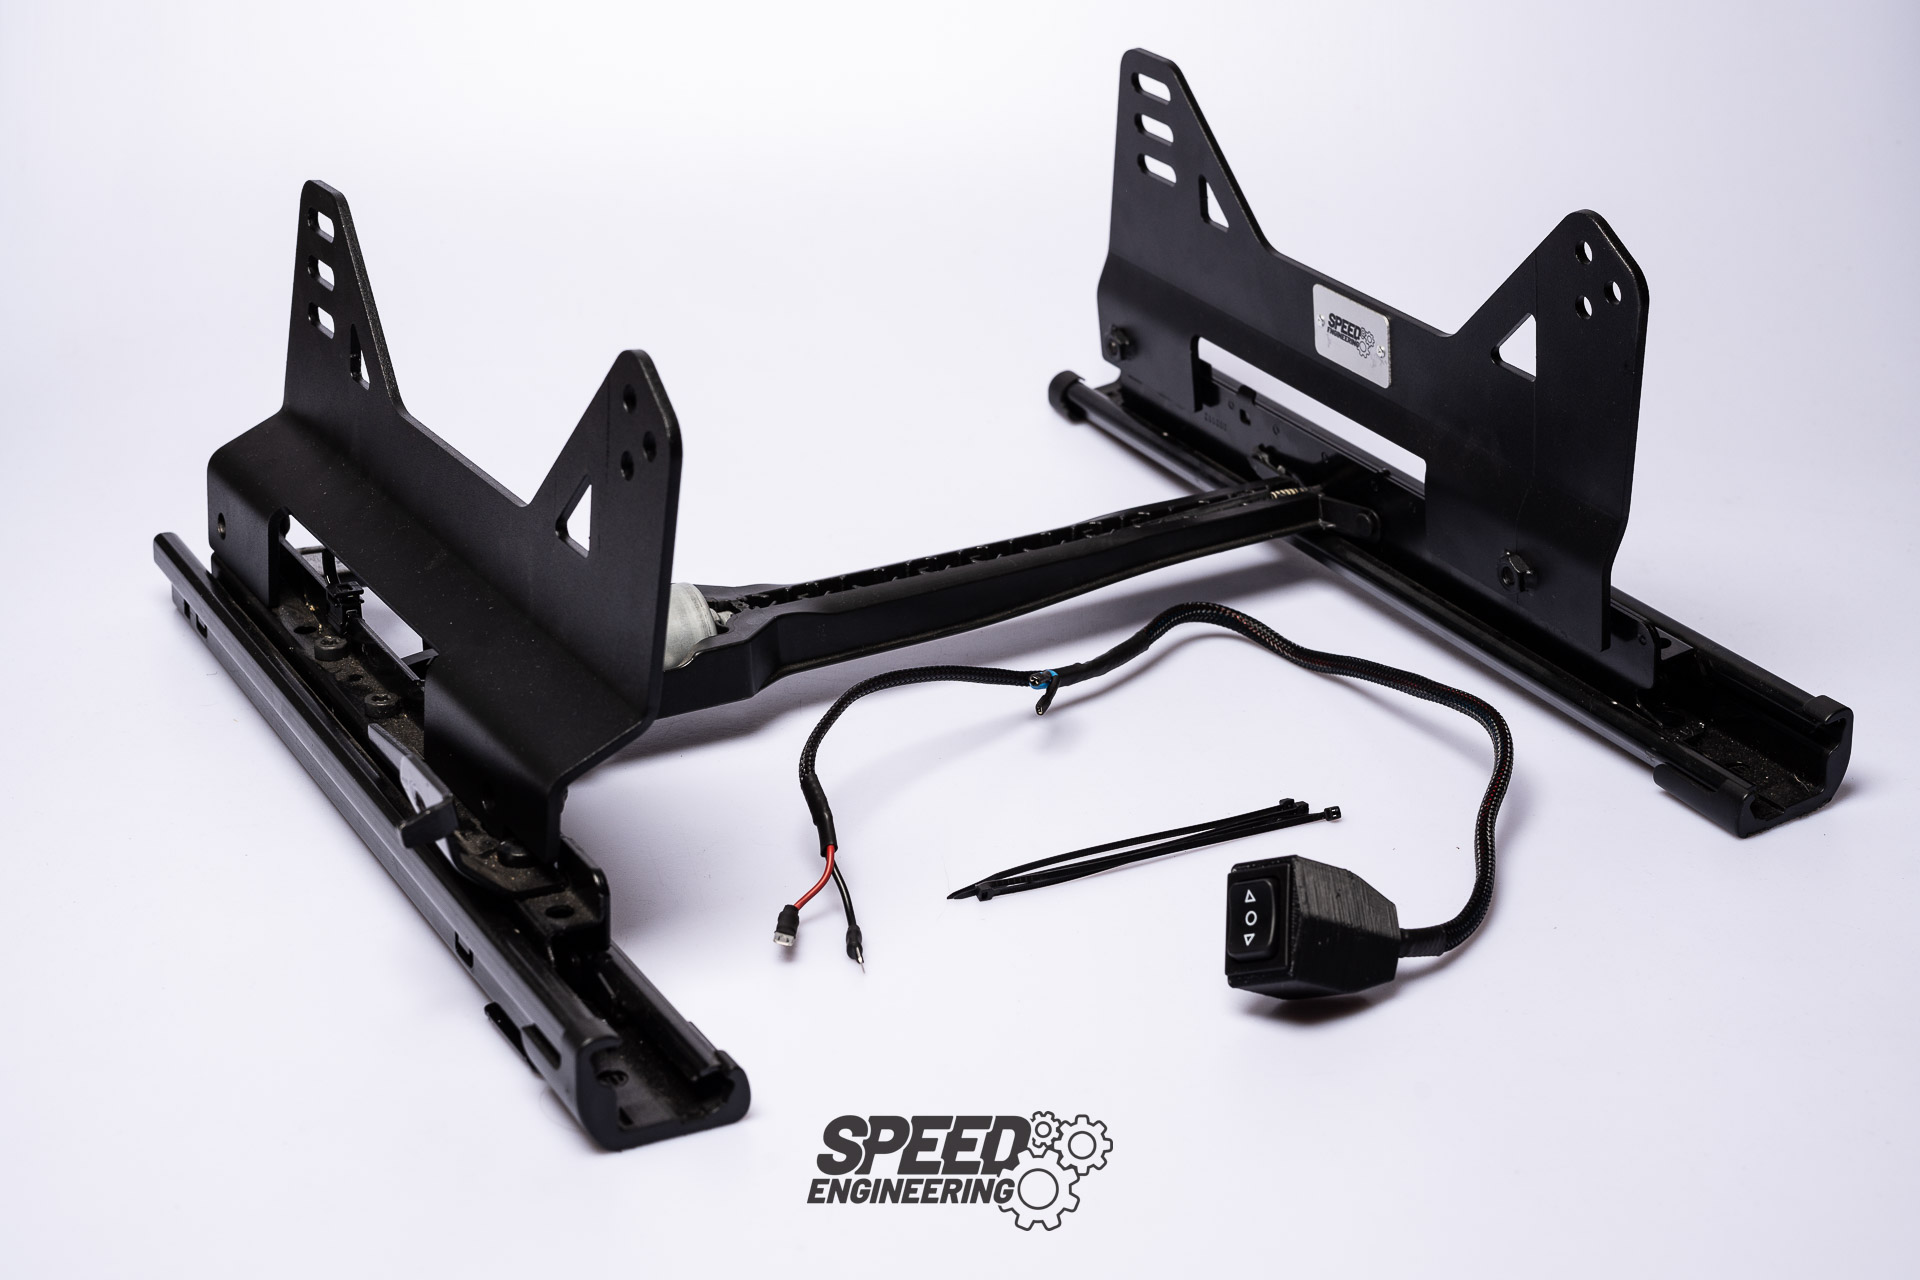 Electric kit suitable for electric BMW OEM running rails Gx Fx E8x E9x M2 M3 M4 M140i M235i